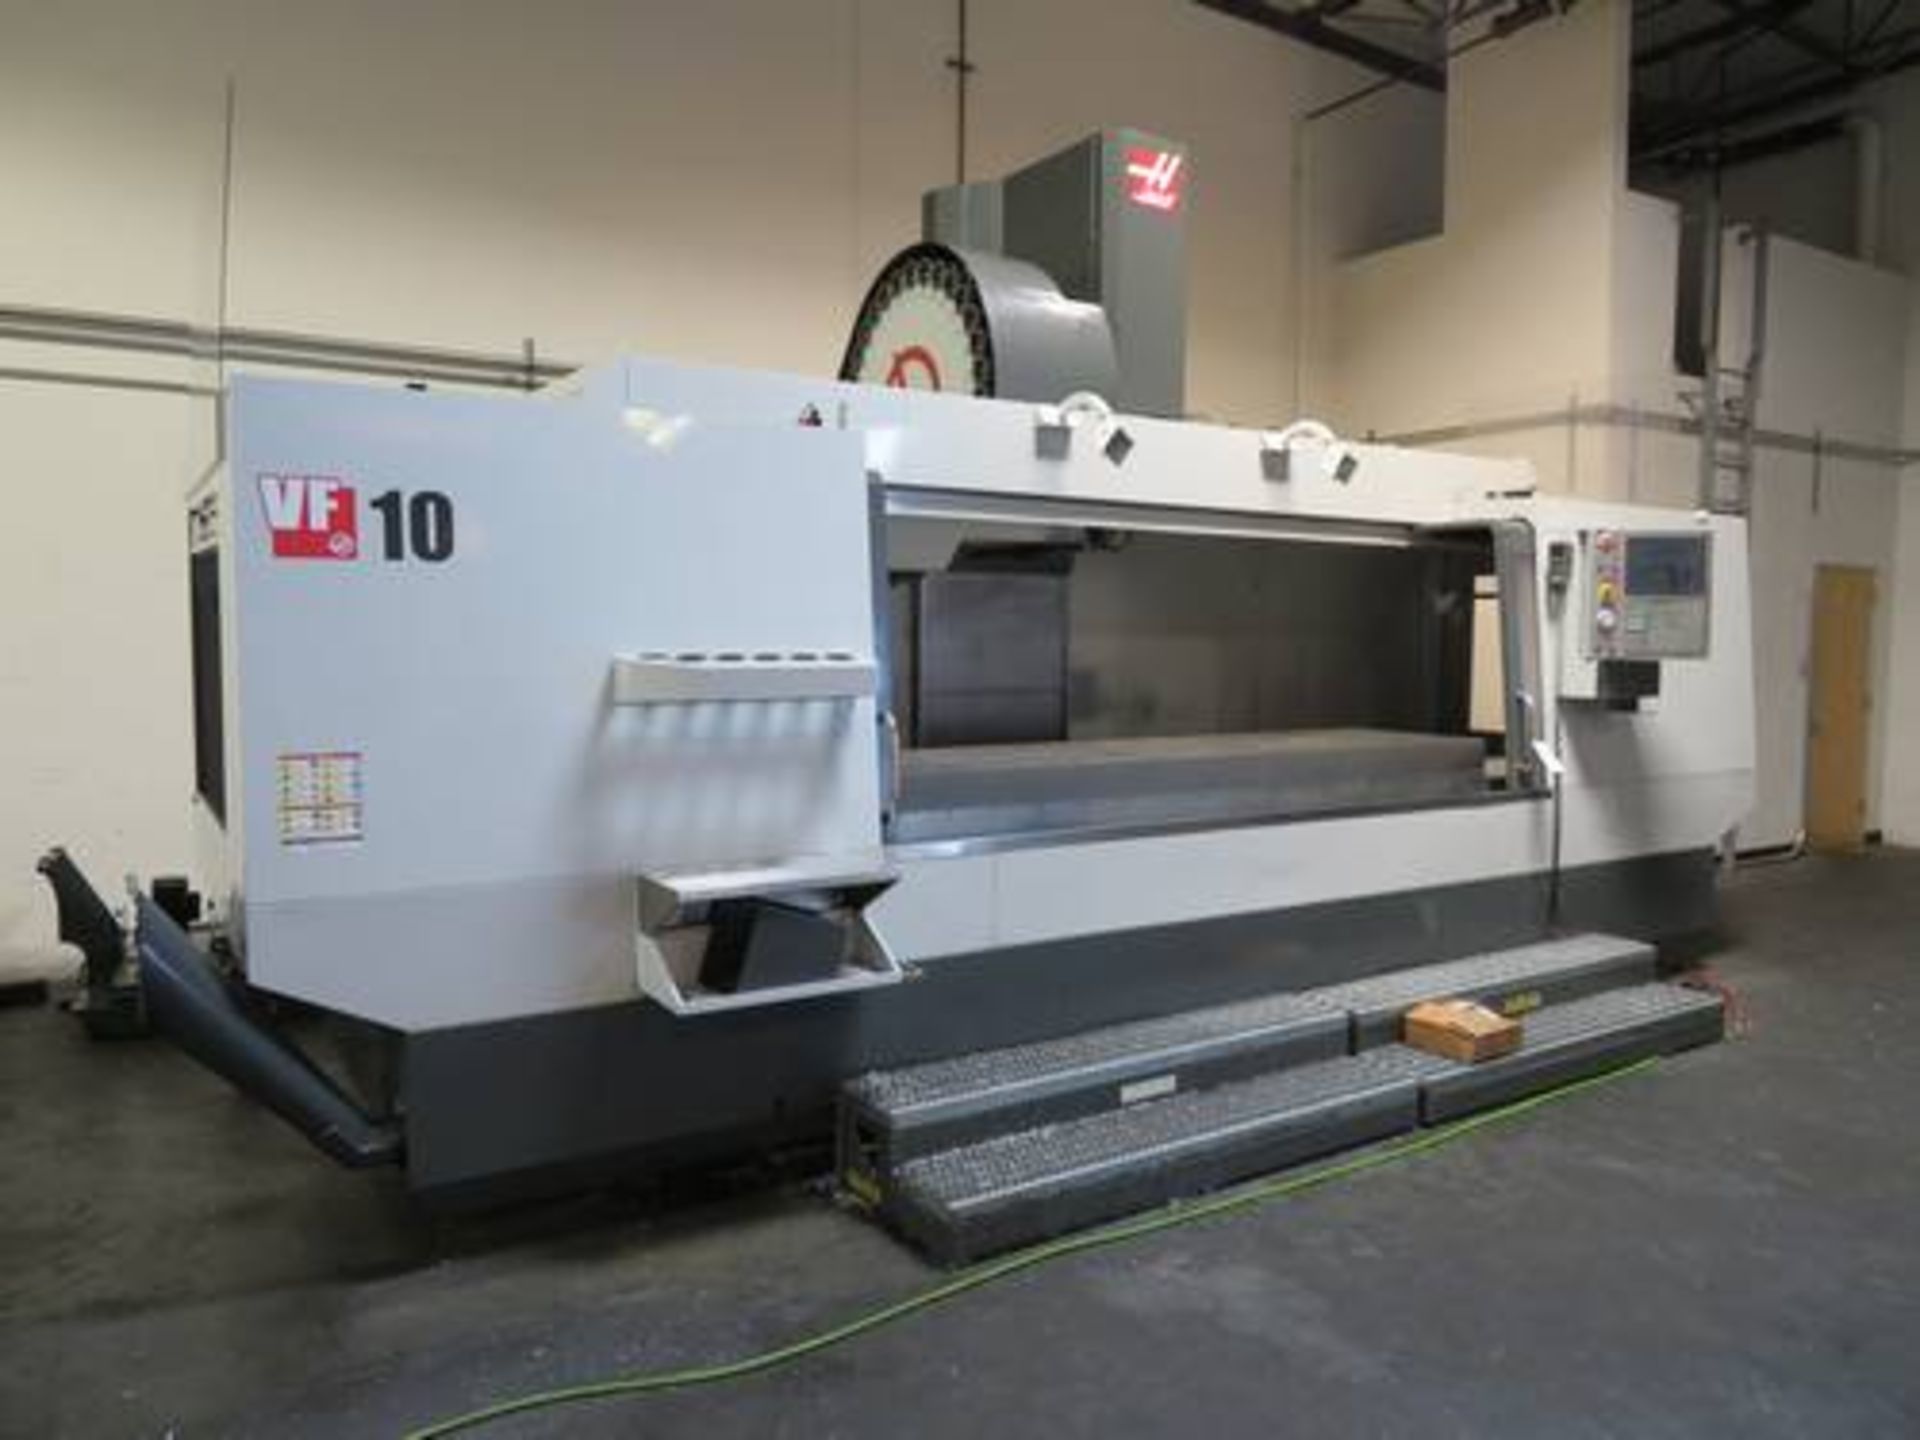 Haas VF10/50, 3-Axis V.M.C Haas Control, 120" x 32" x 30", 50 Taper, 7500 RPM Spindle, 30hp Spindle,